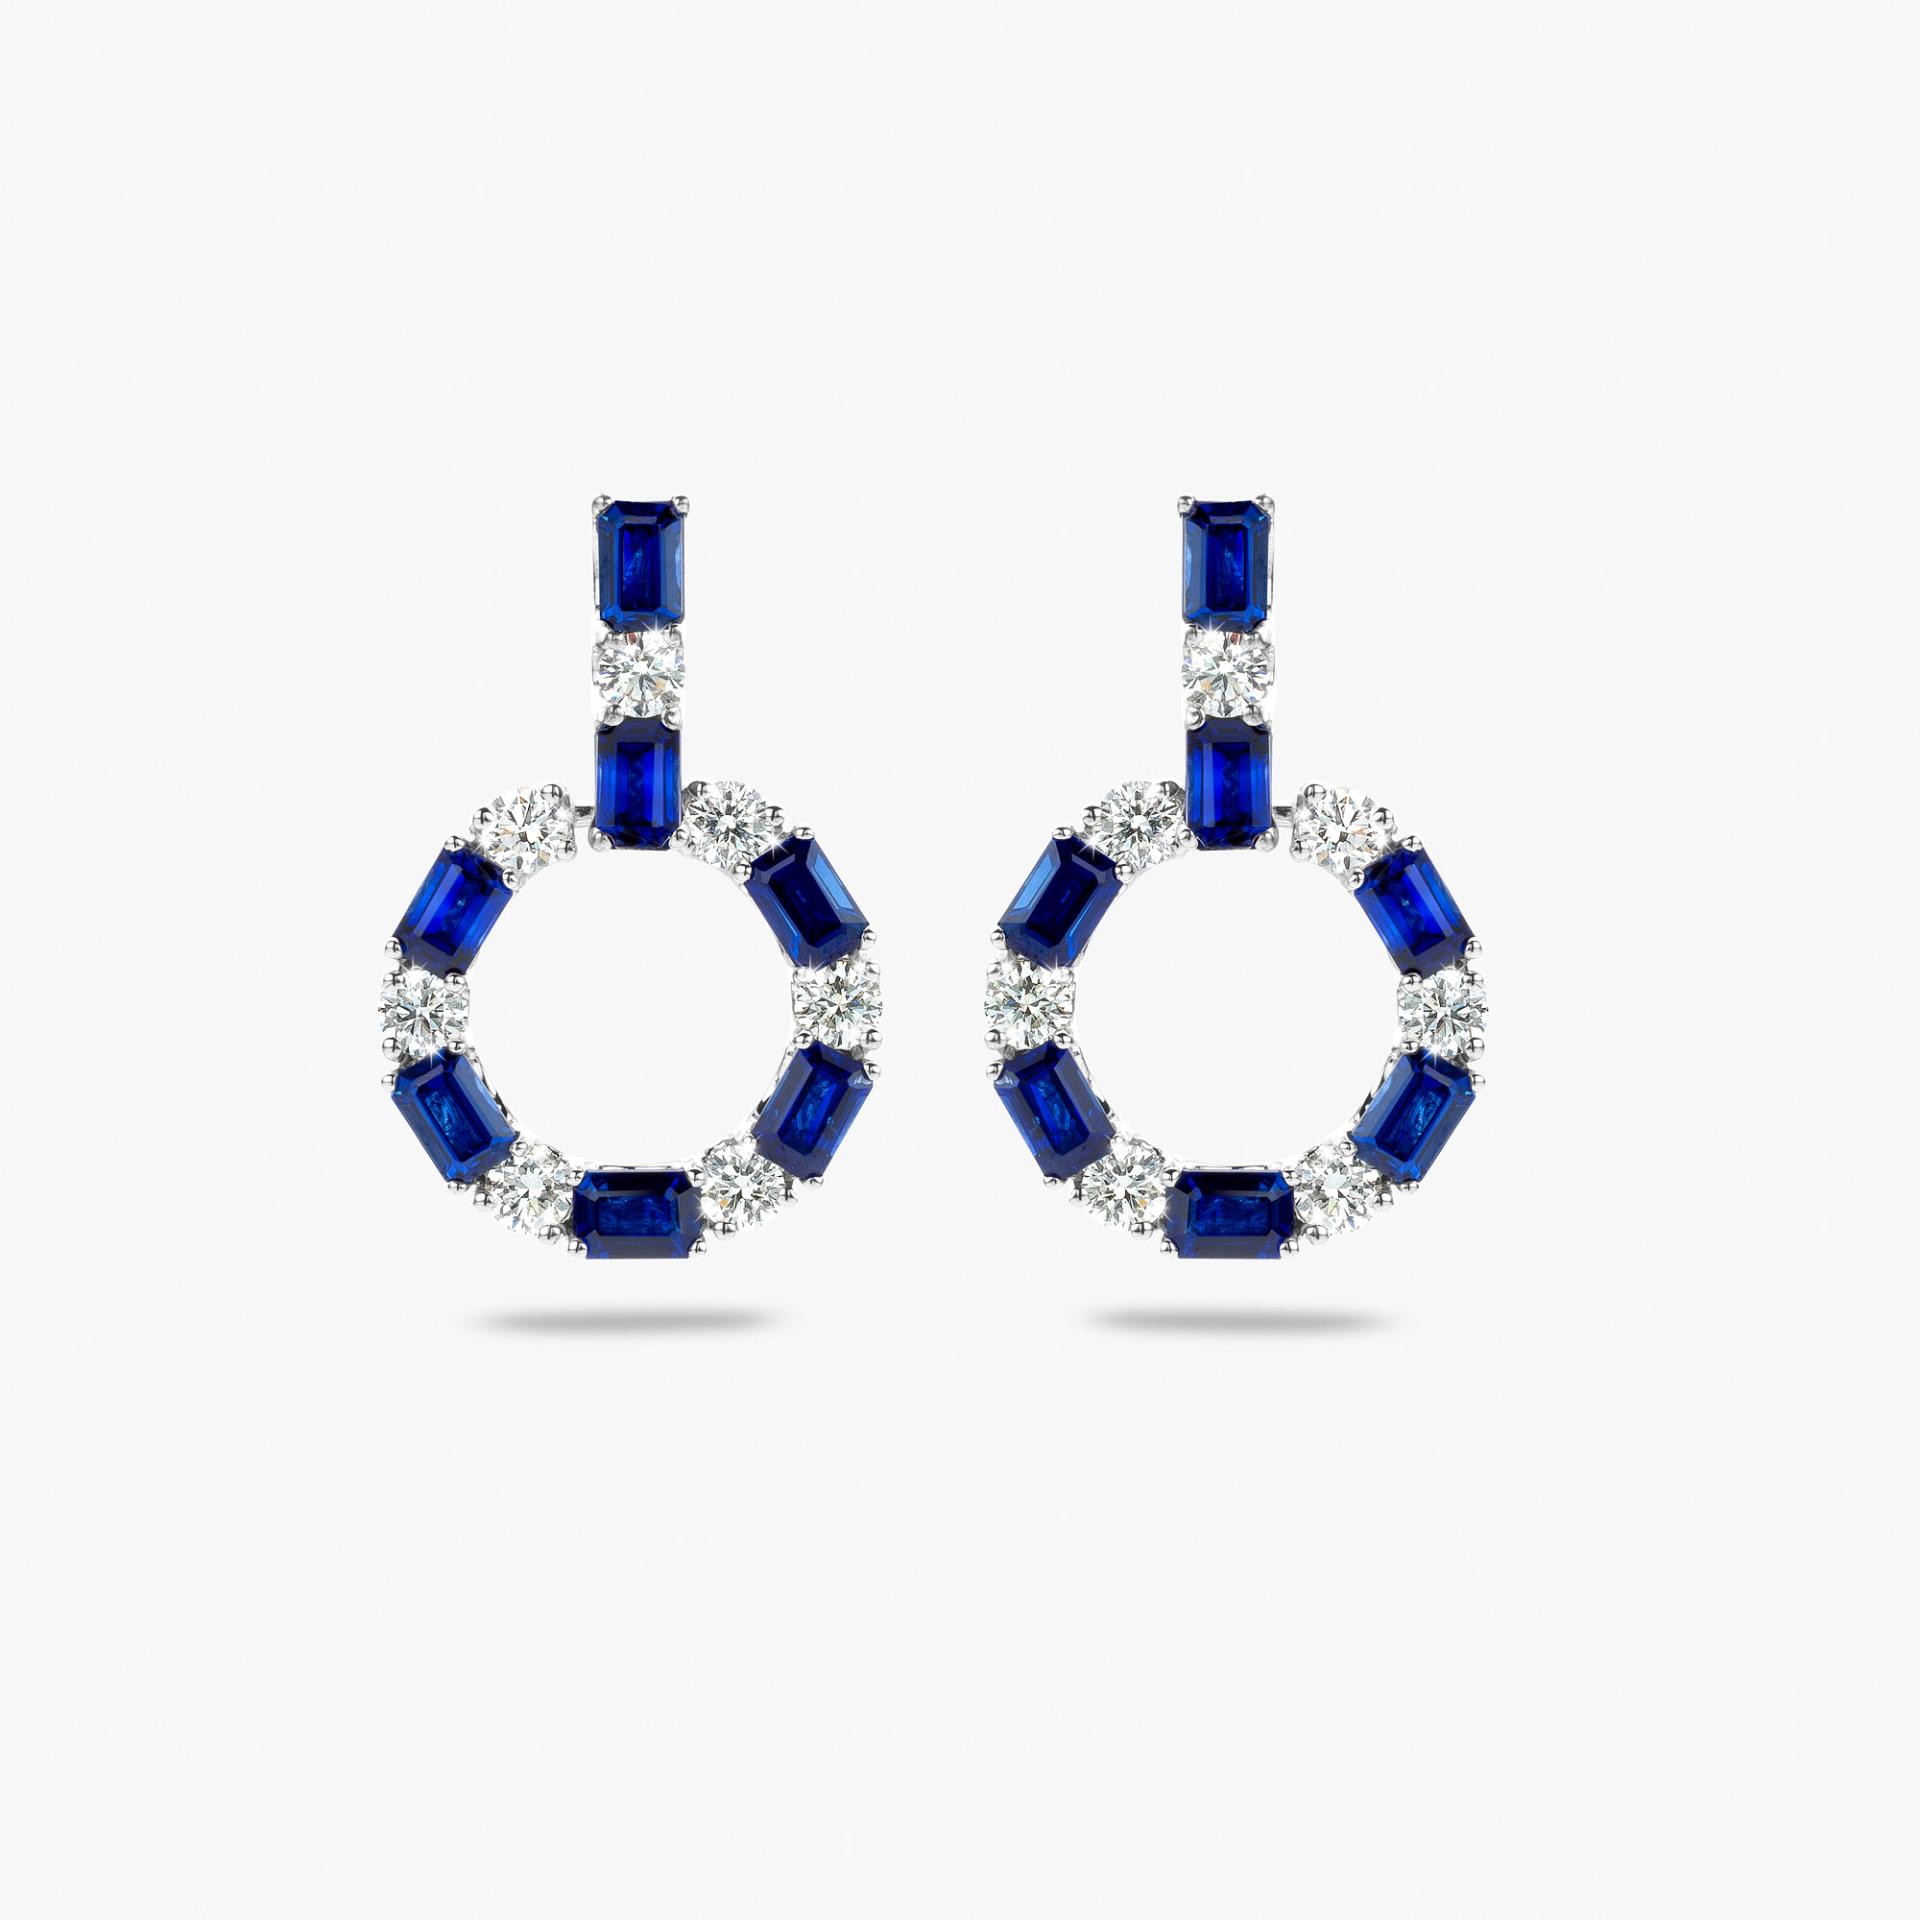 White gold earrings set with blue sapphire and brilliant cut diamonds
 made by Maison De Greef